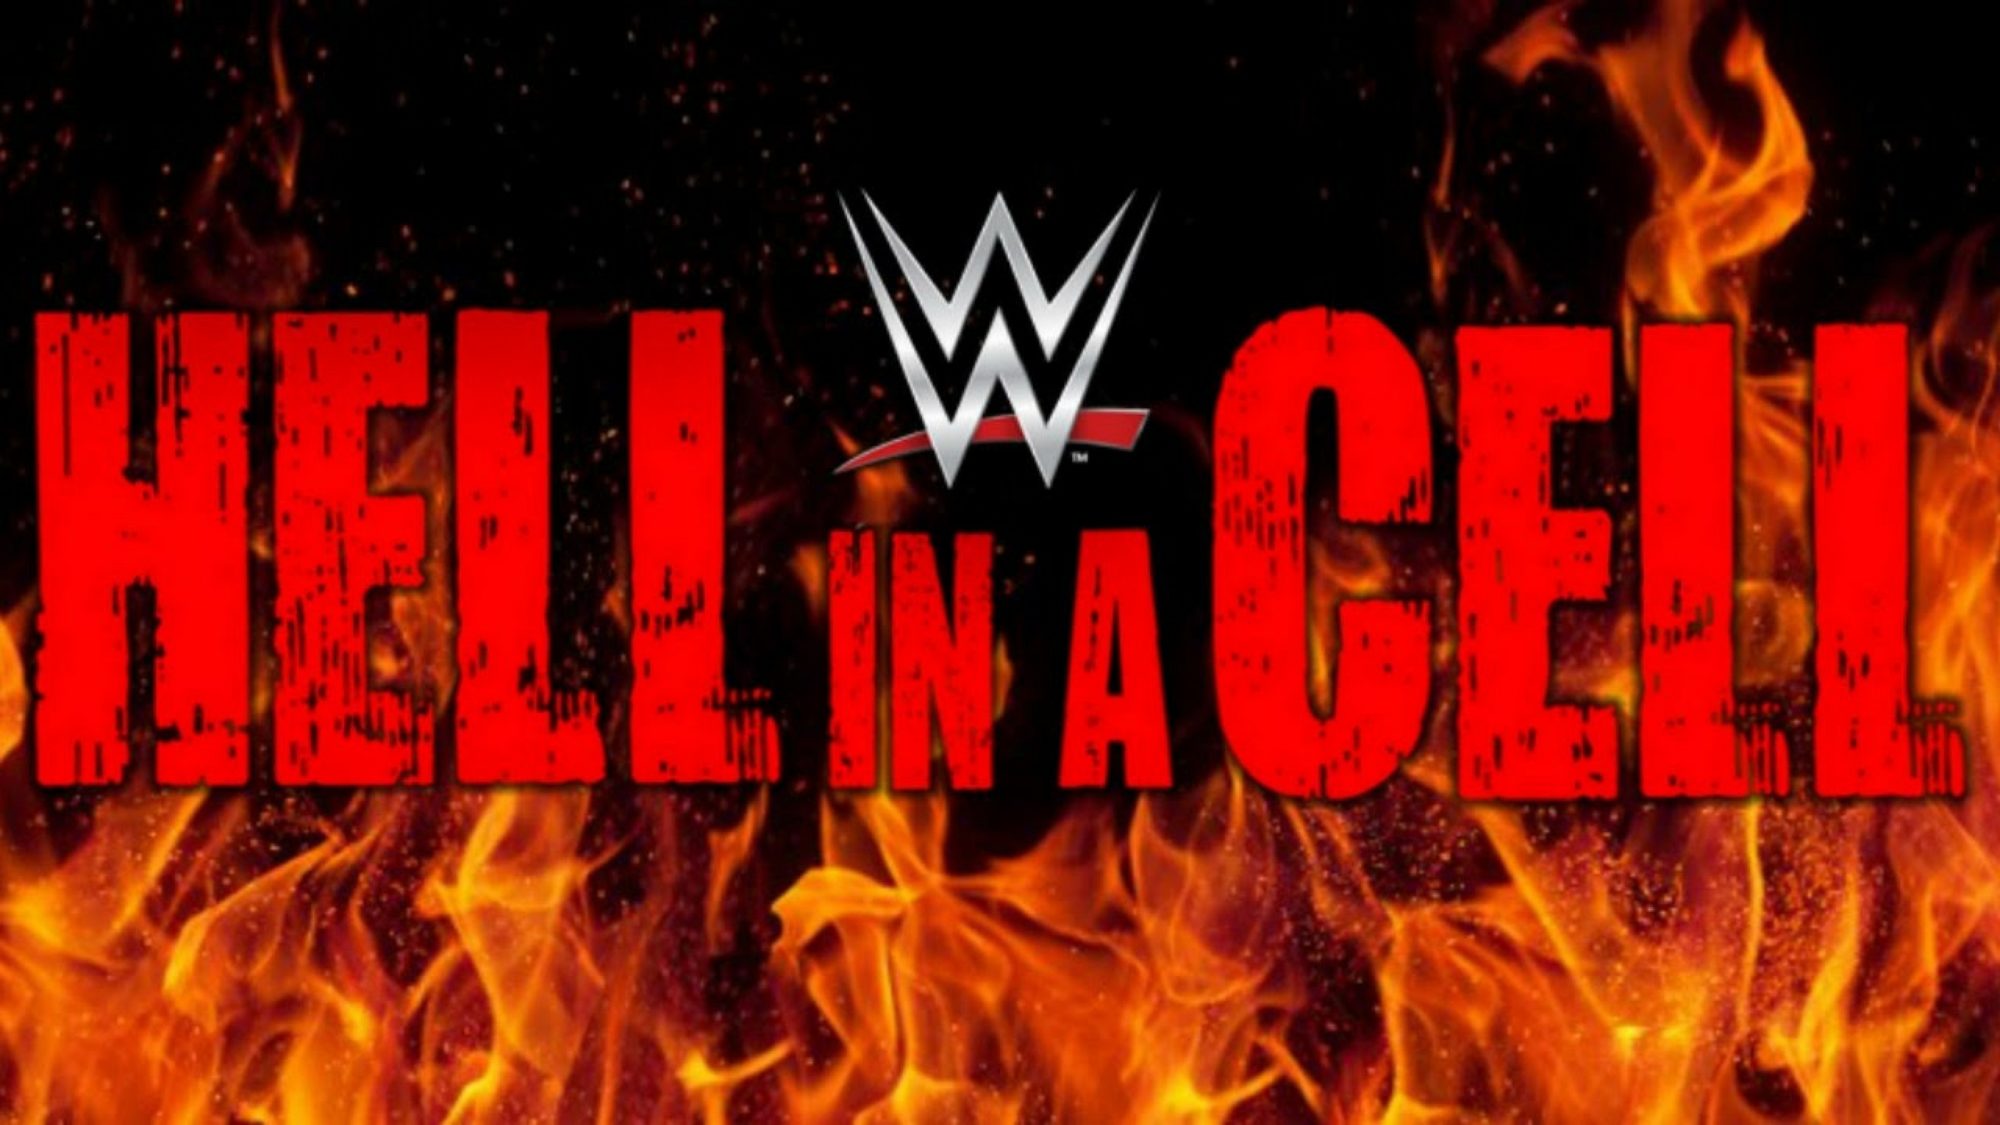 WWE Hell In A Cell 2017 - TheGuyBlog.com